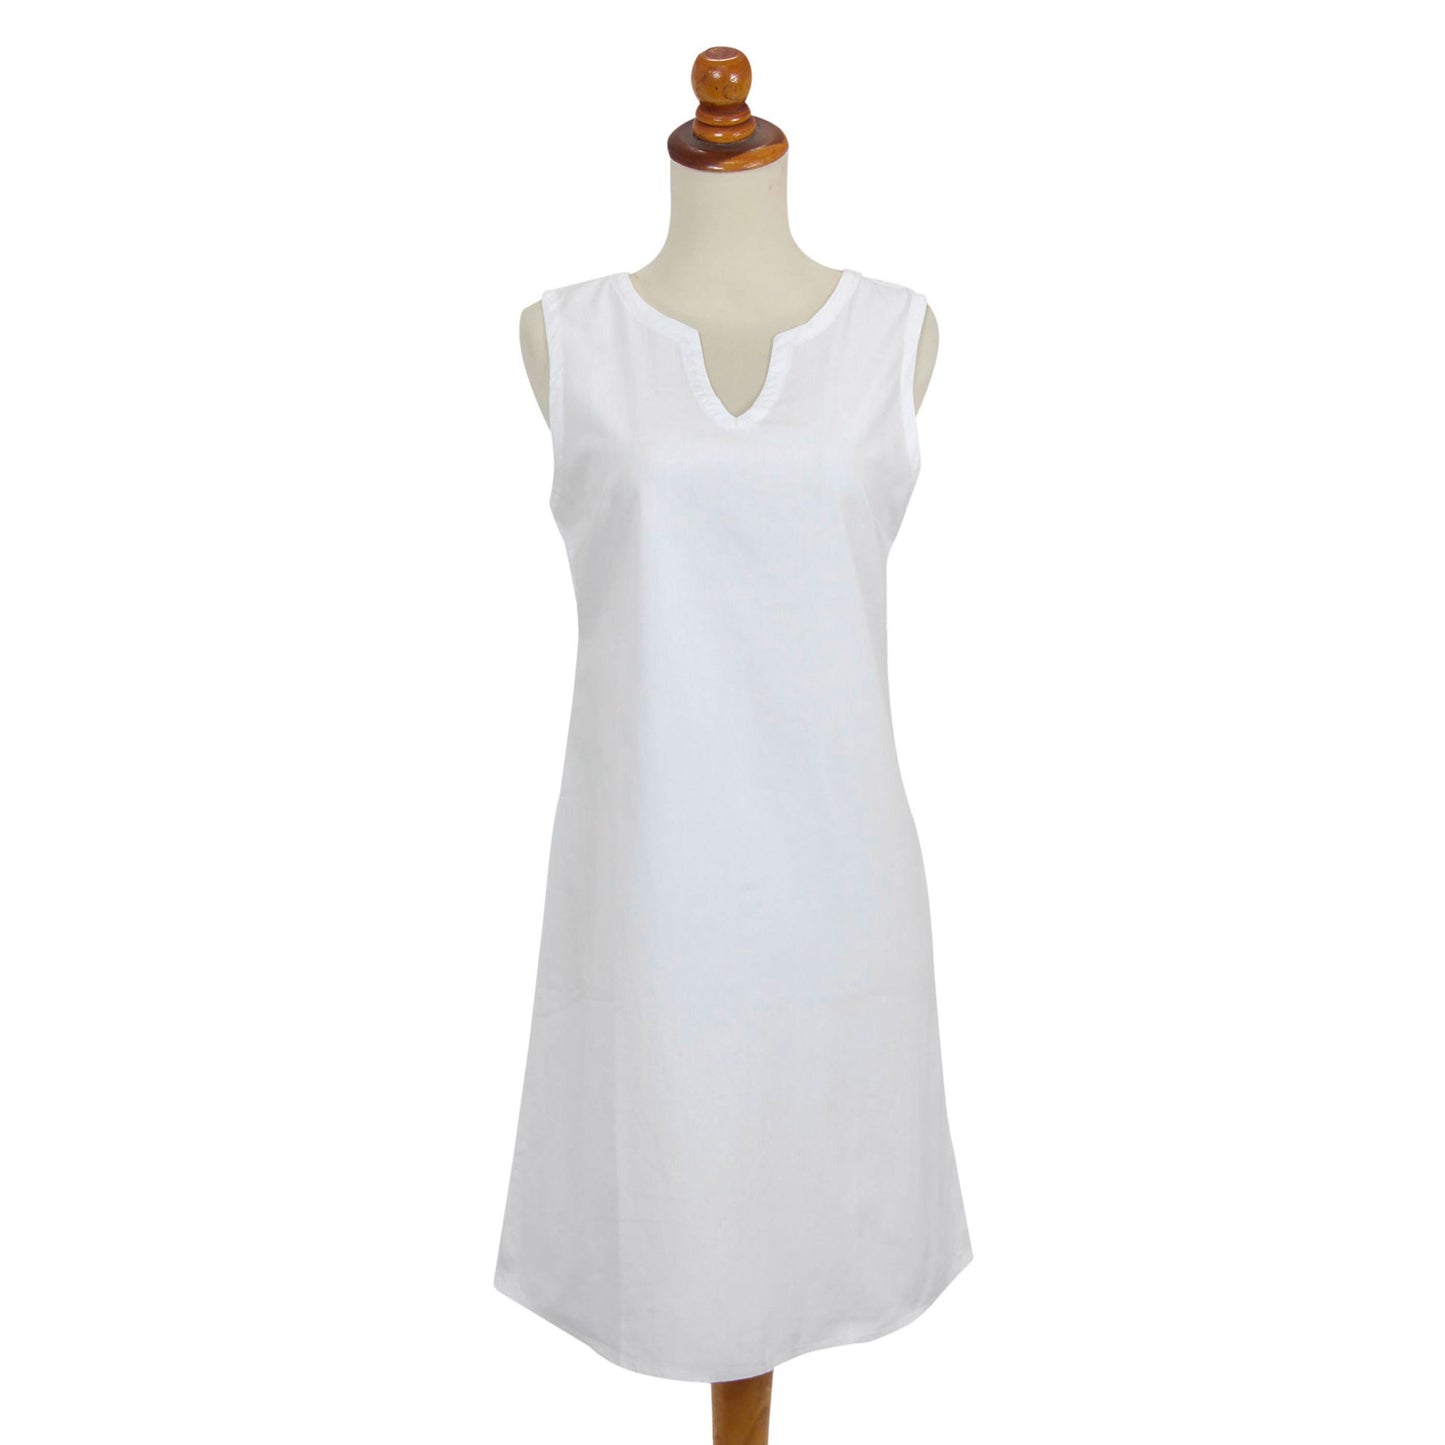 Lily in White Cotton Shift Dress